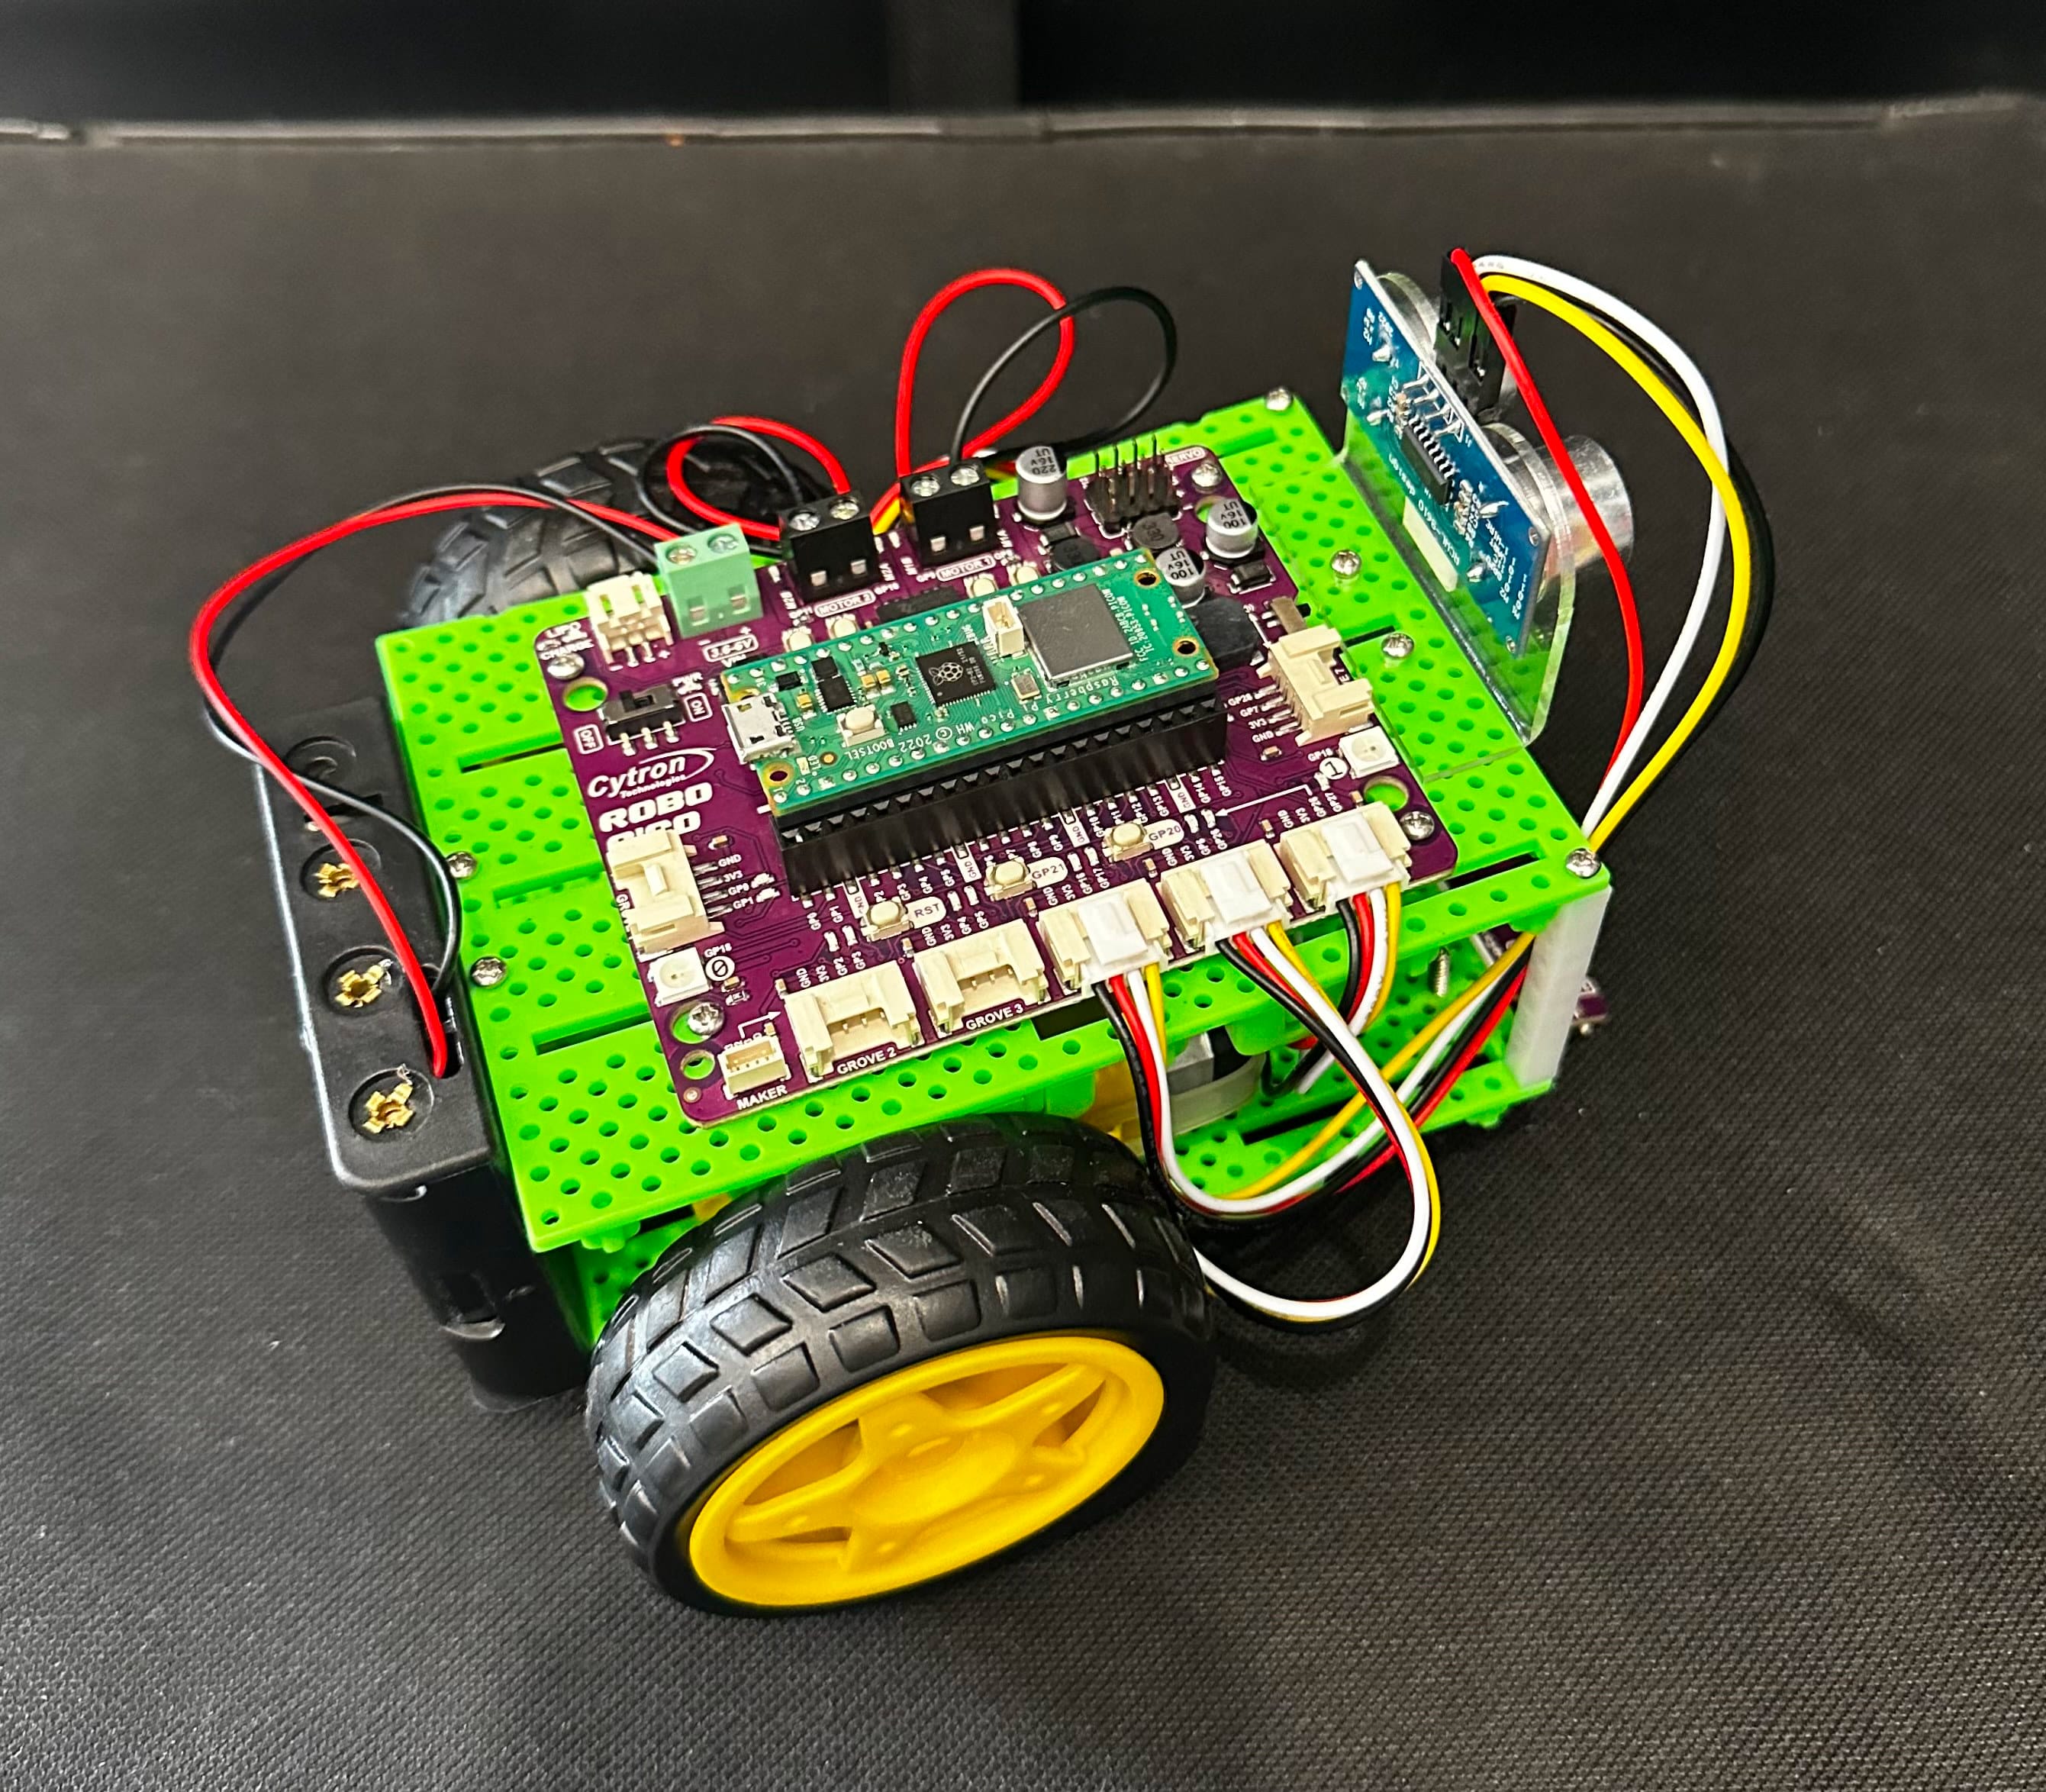 Robo review - Raspberry Pico W-based motor & sensor control board tested with BocoBot robotic kit - CNX Software